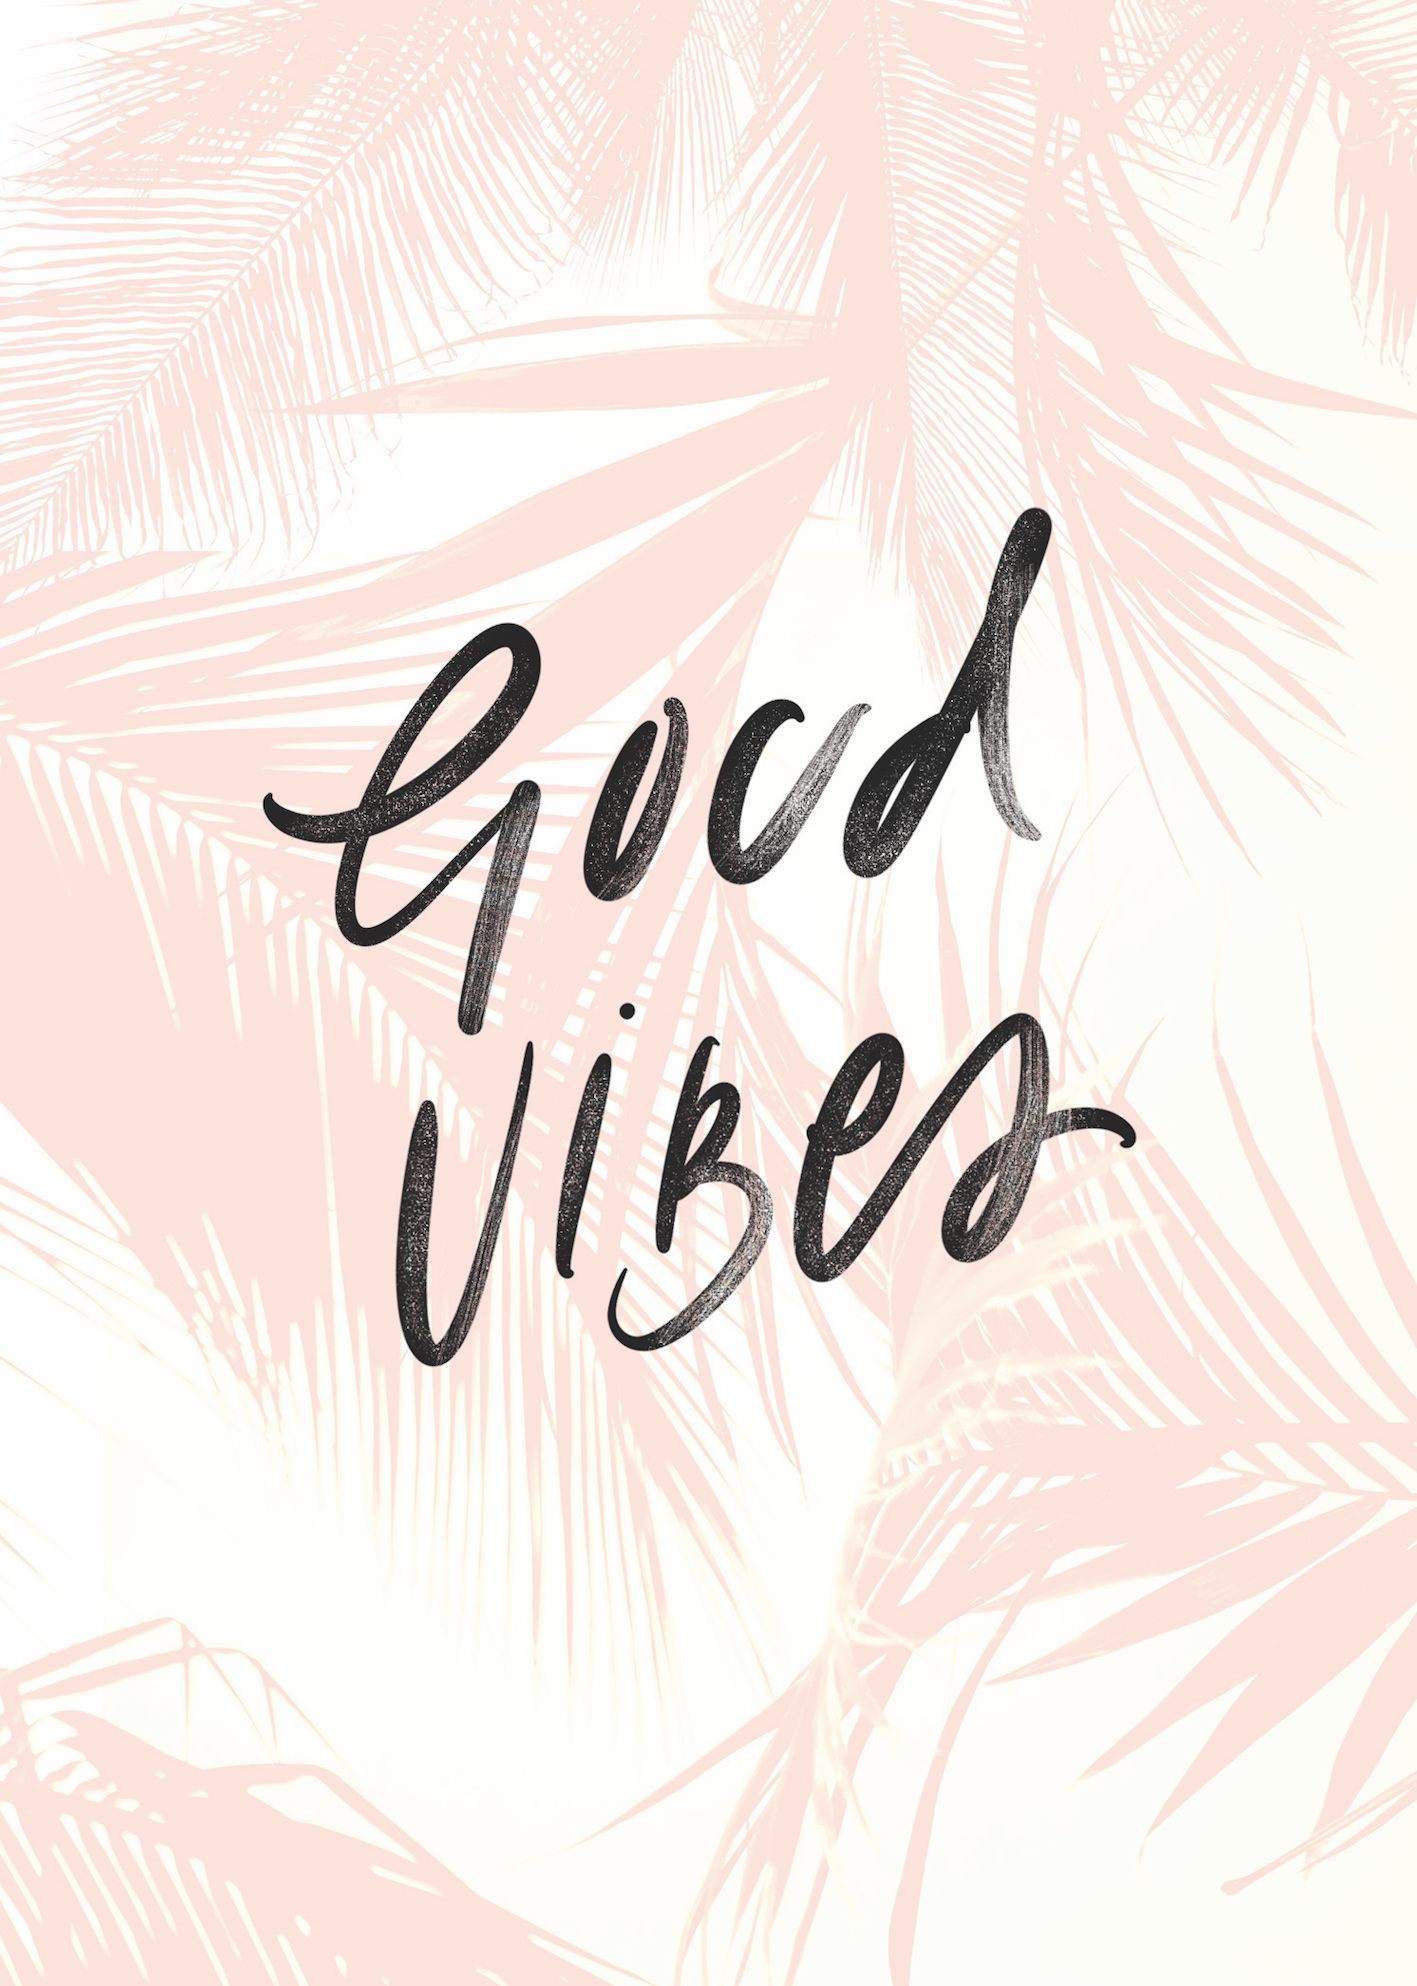 Positive Vibes Wallpapers - Wallpaper Cave